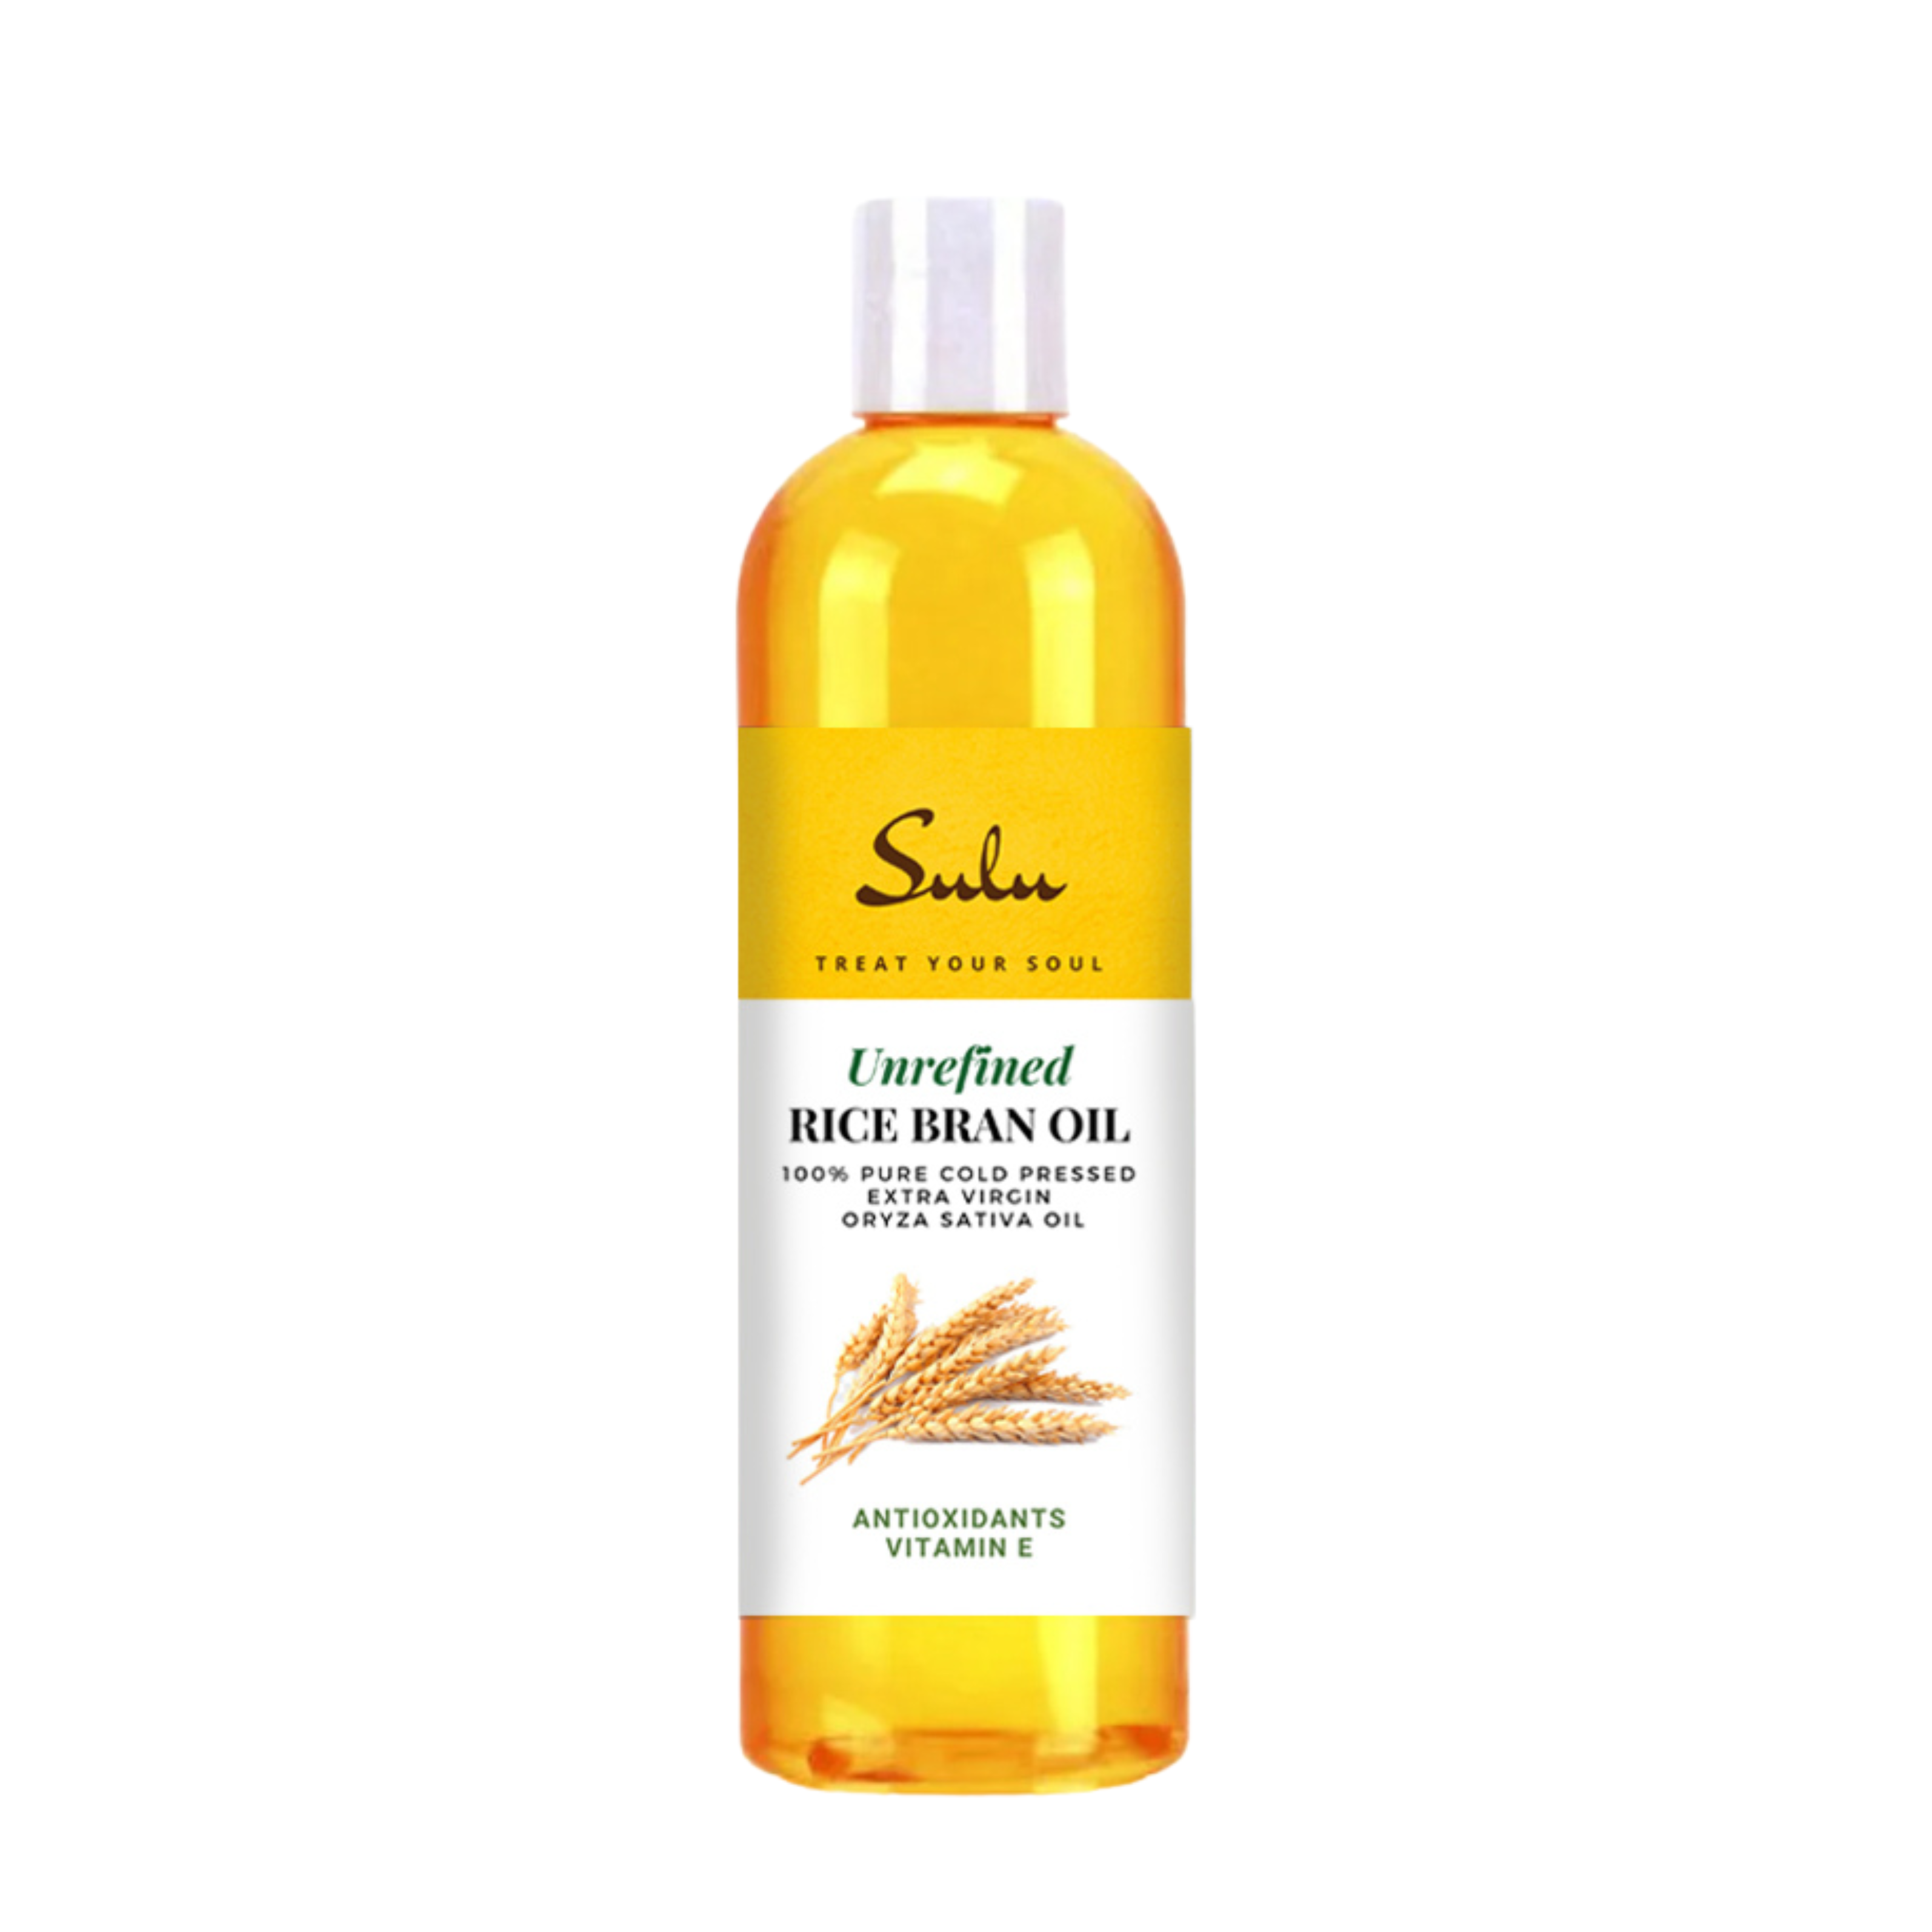 Rice Bran Oil by Velona Refined, Cold Pressed, Cooking Hair Body